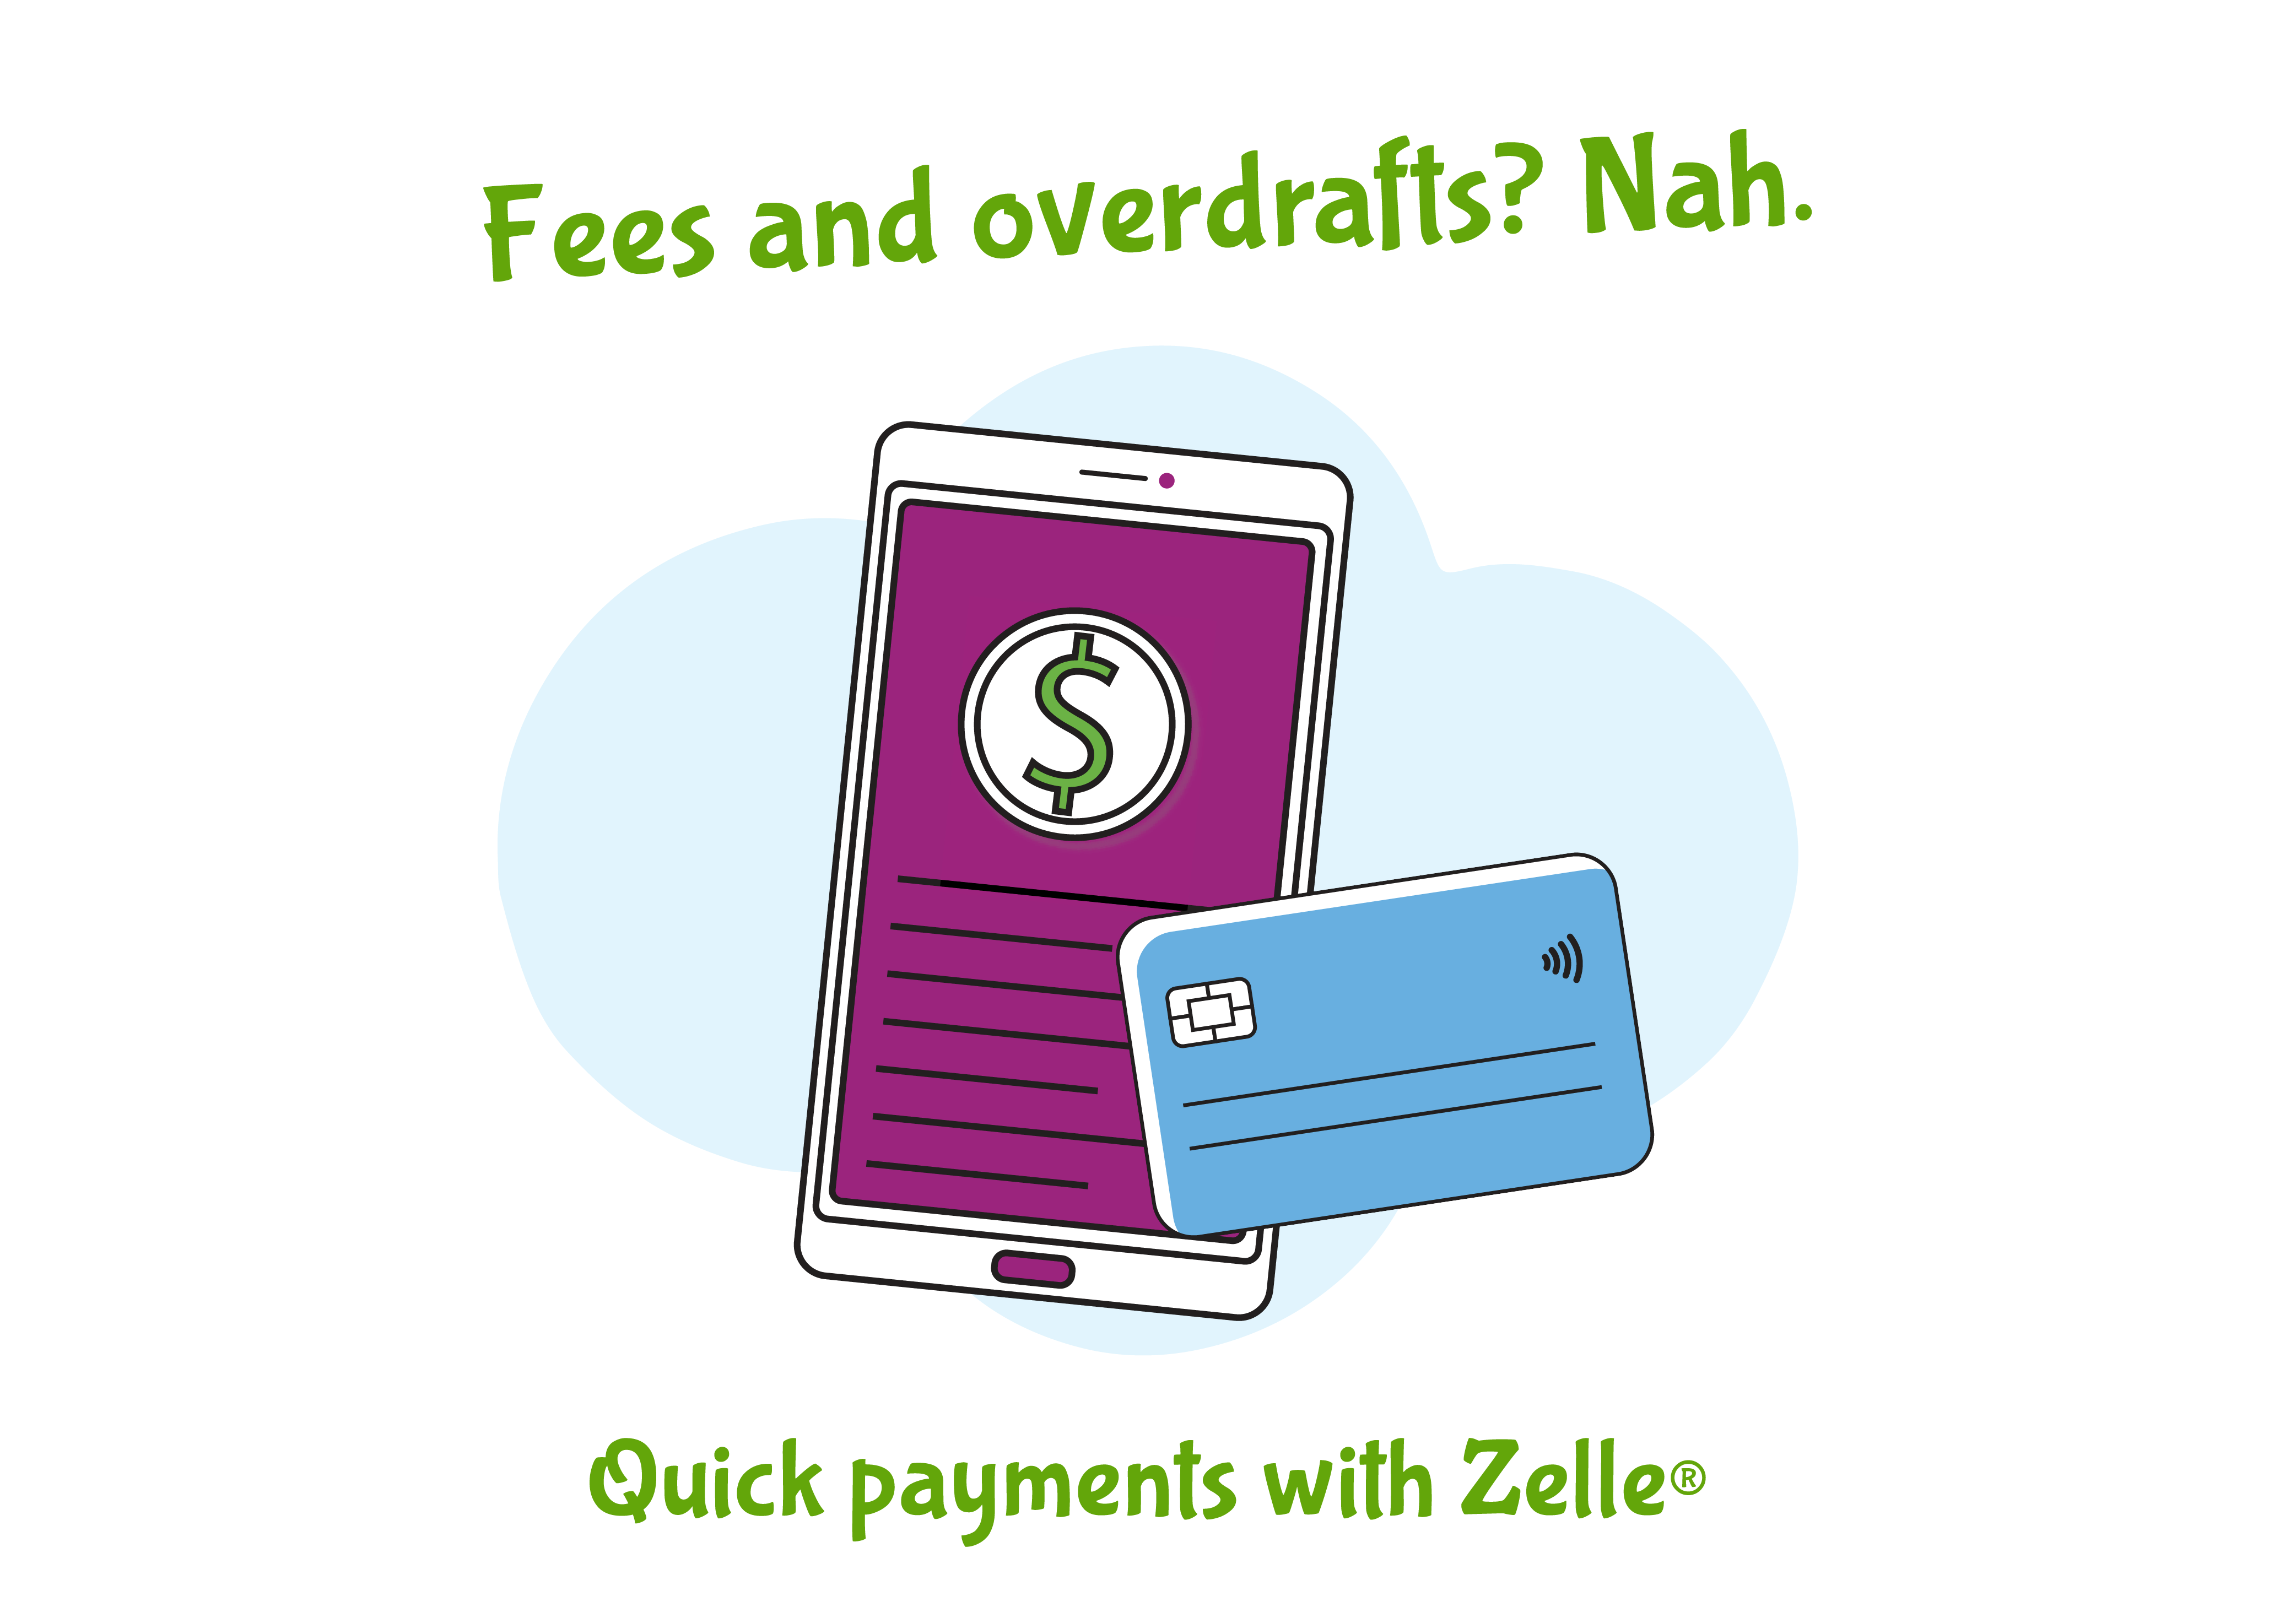 Feed and overdrafts? Nah. Quick Payments with Zelle